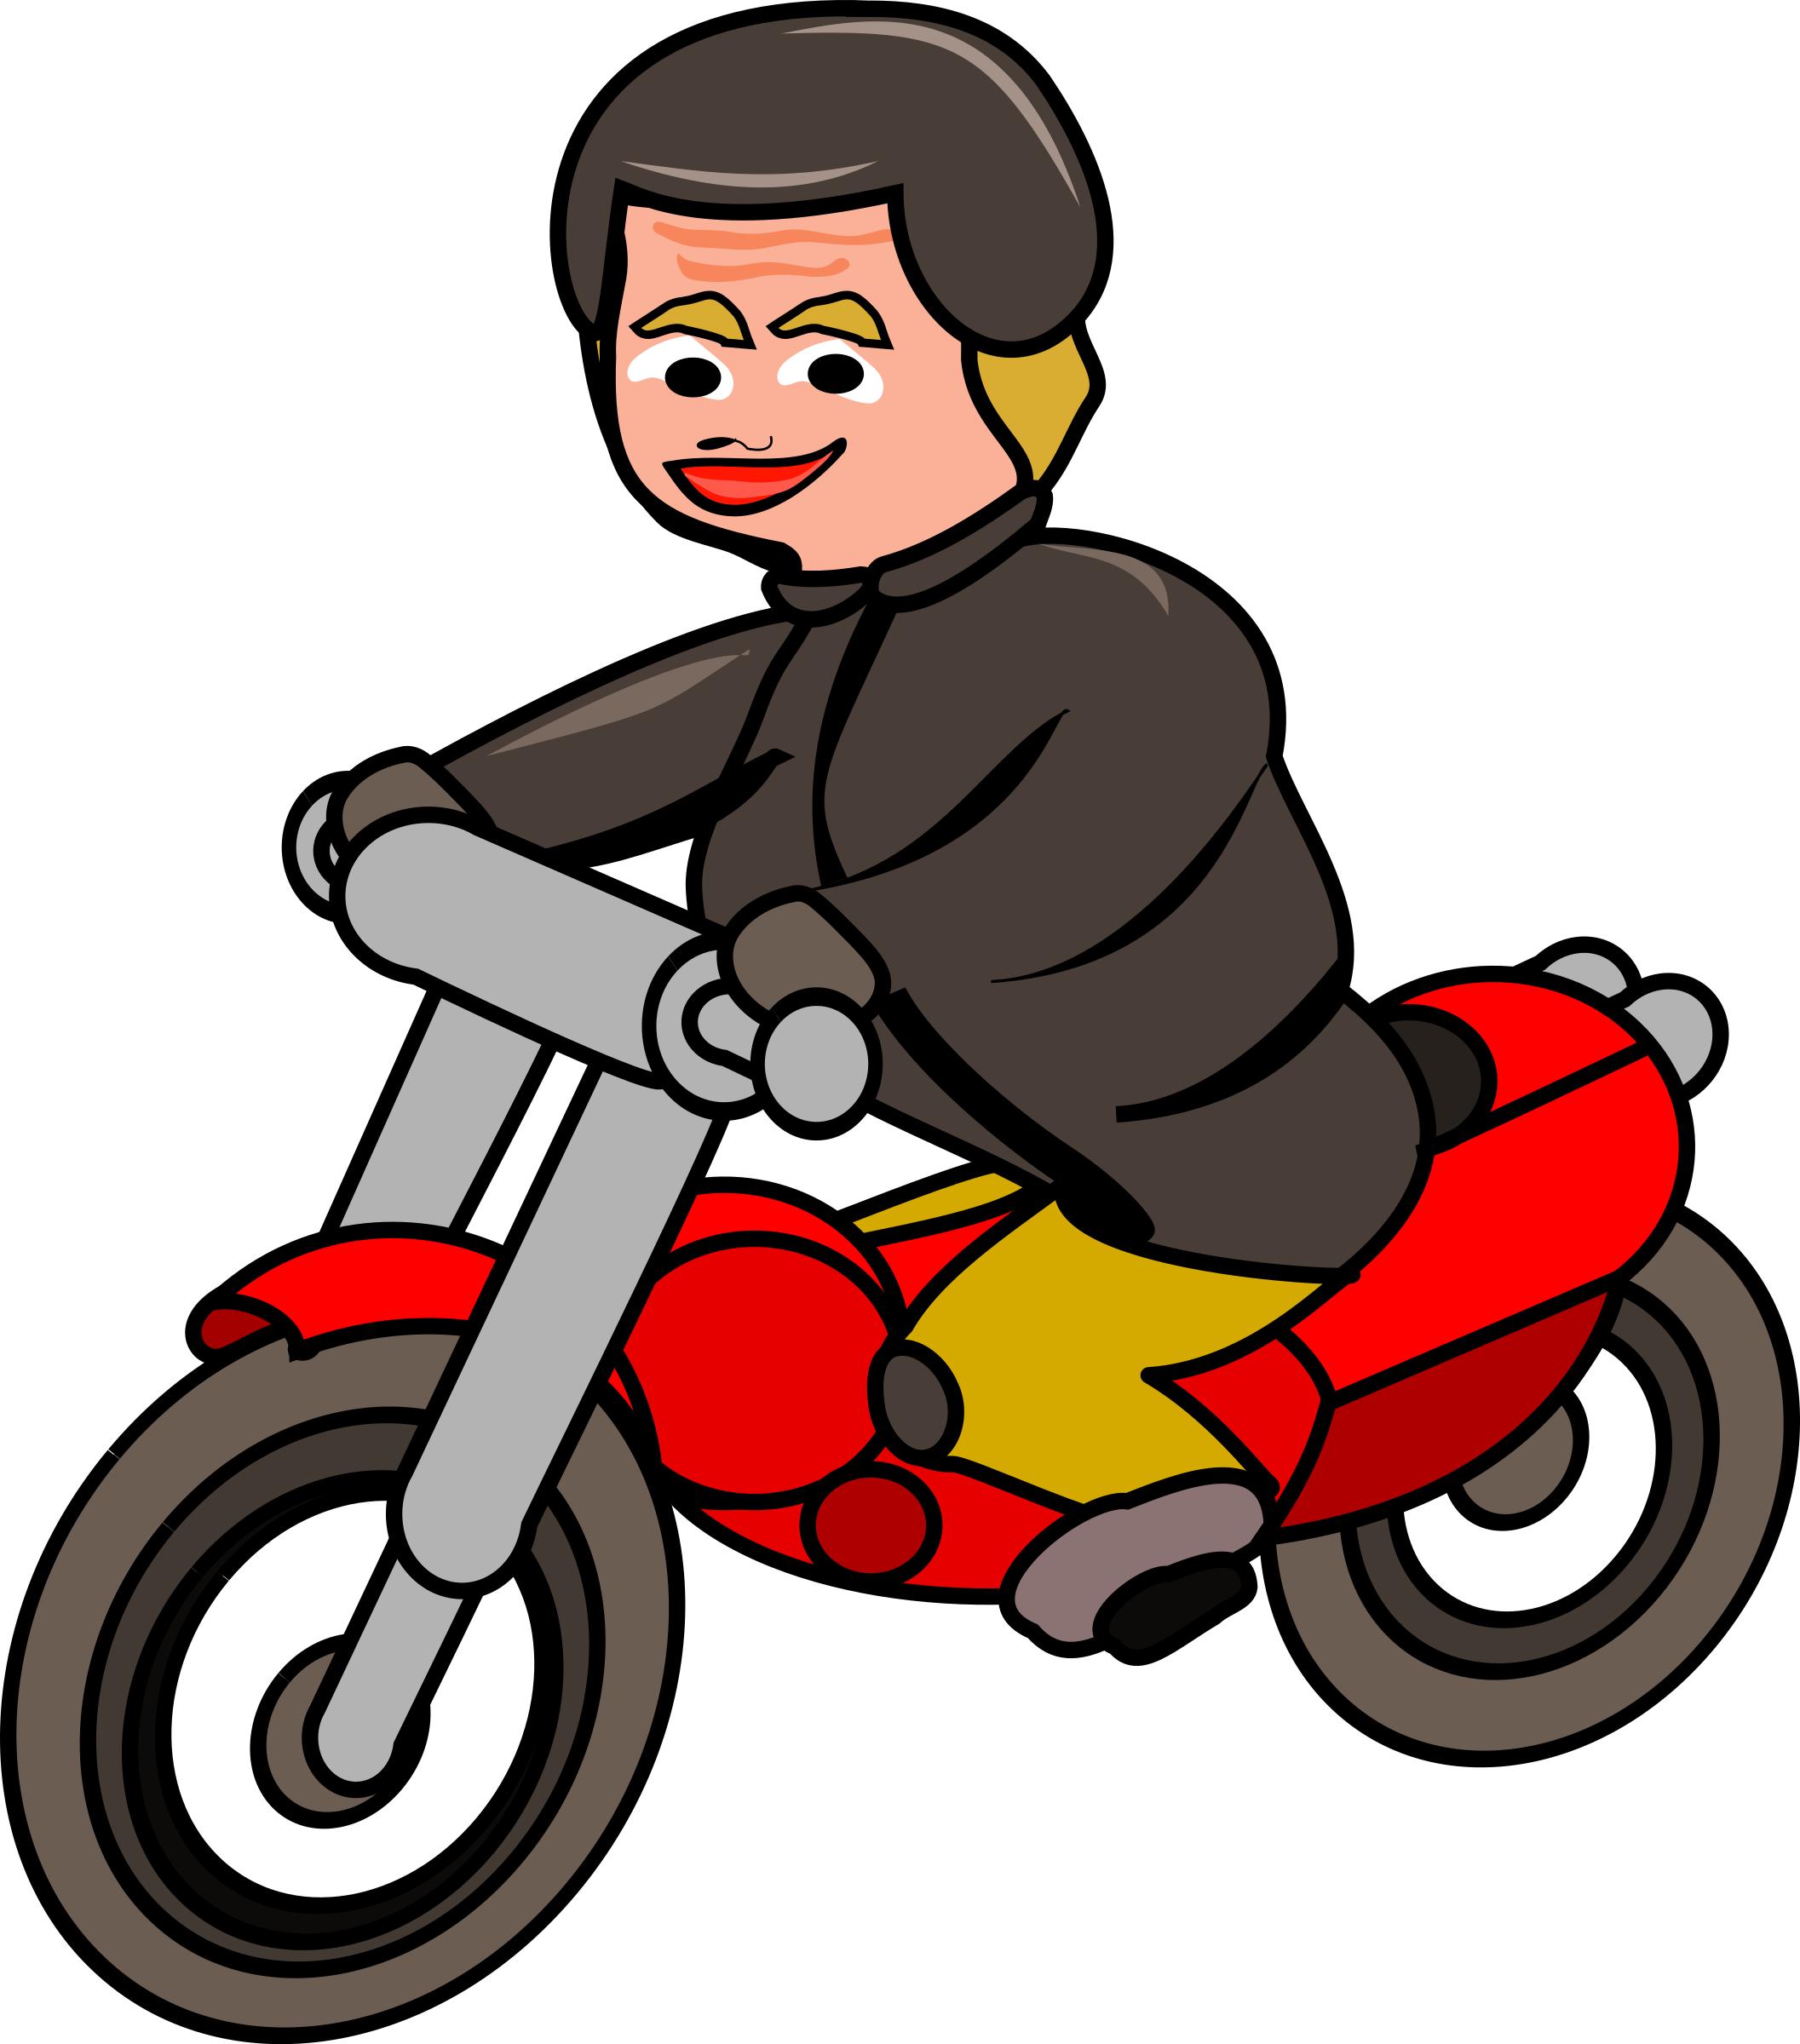 Woman on motorbike png